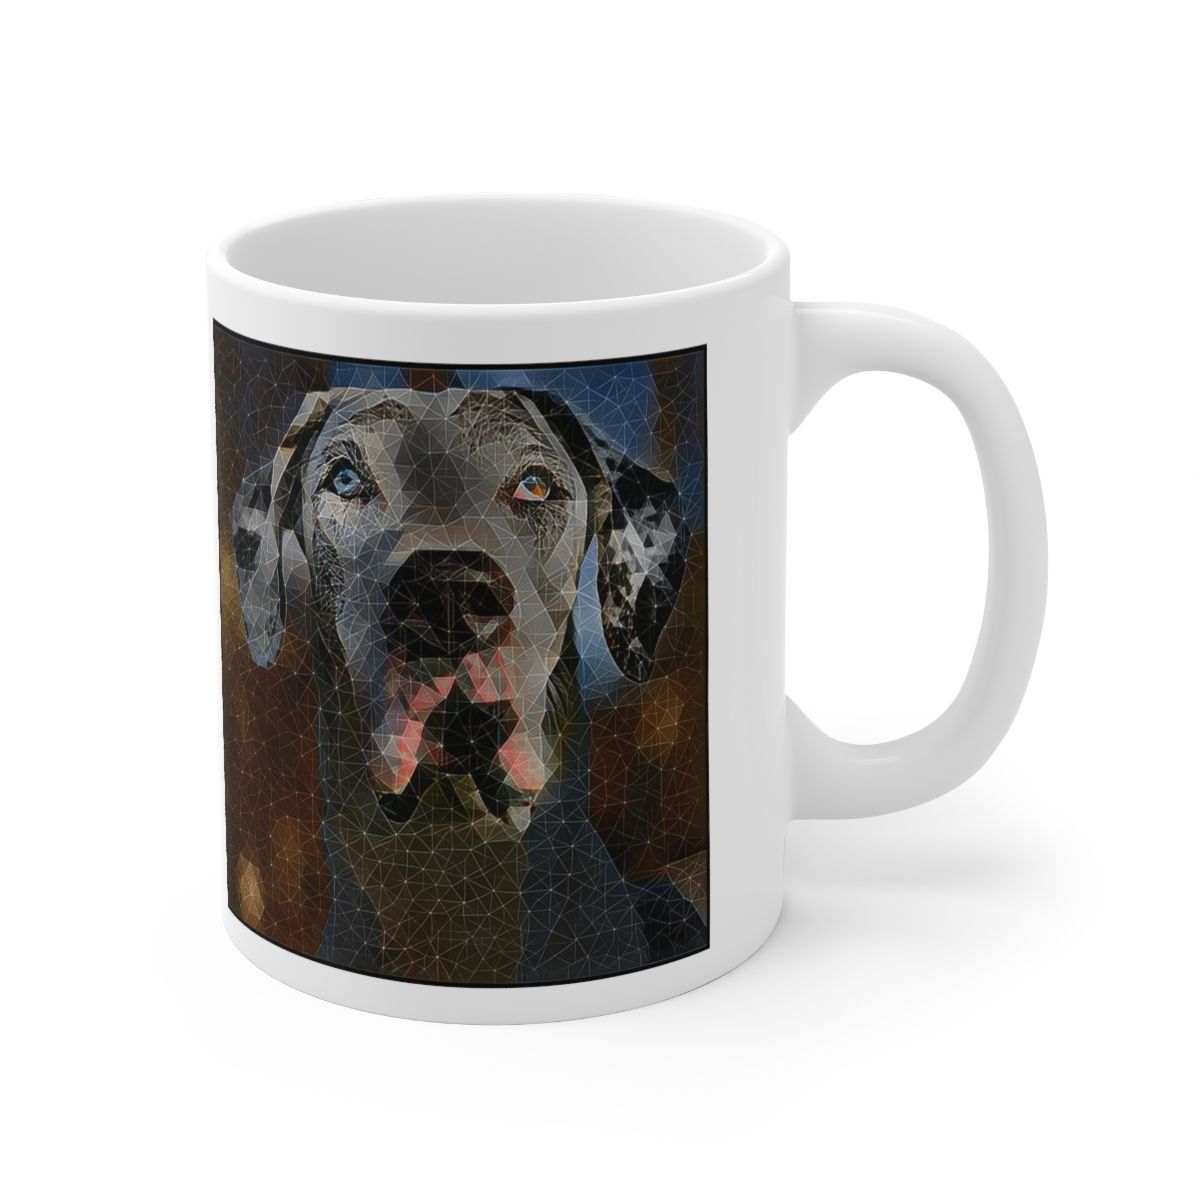 Picture of Great Dane-Rock Candy Mug